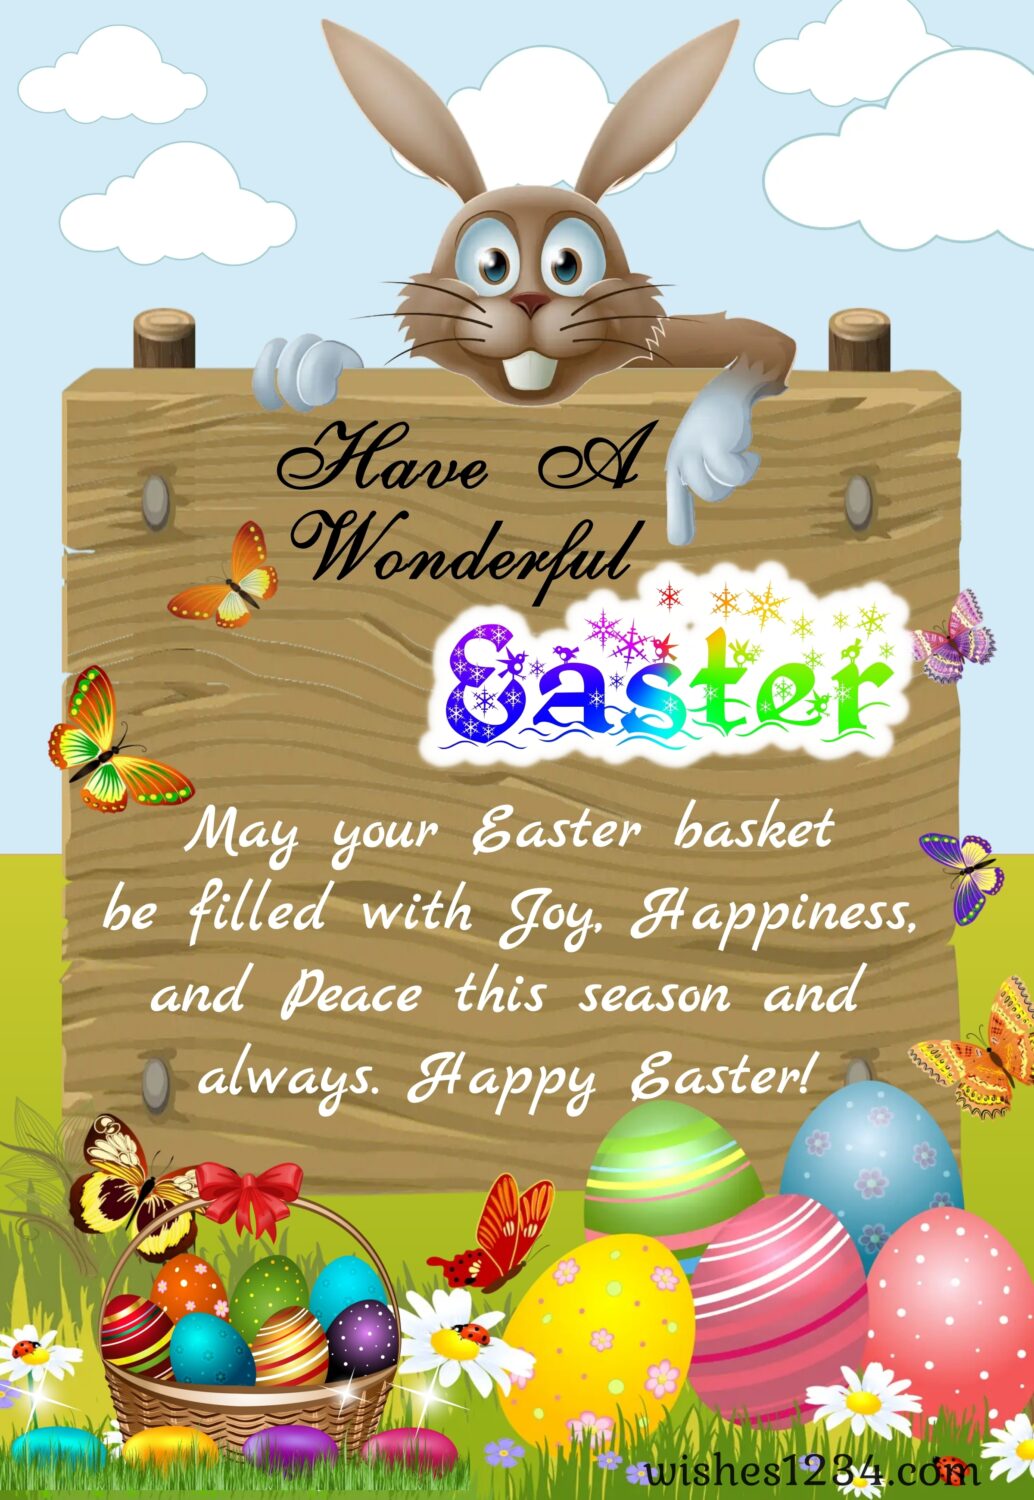 Easter bunny with easter greetings sign, Happy Easter Wishes, Quotes & Images.